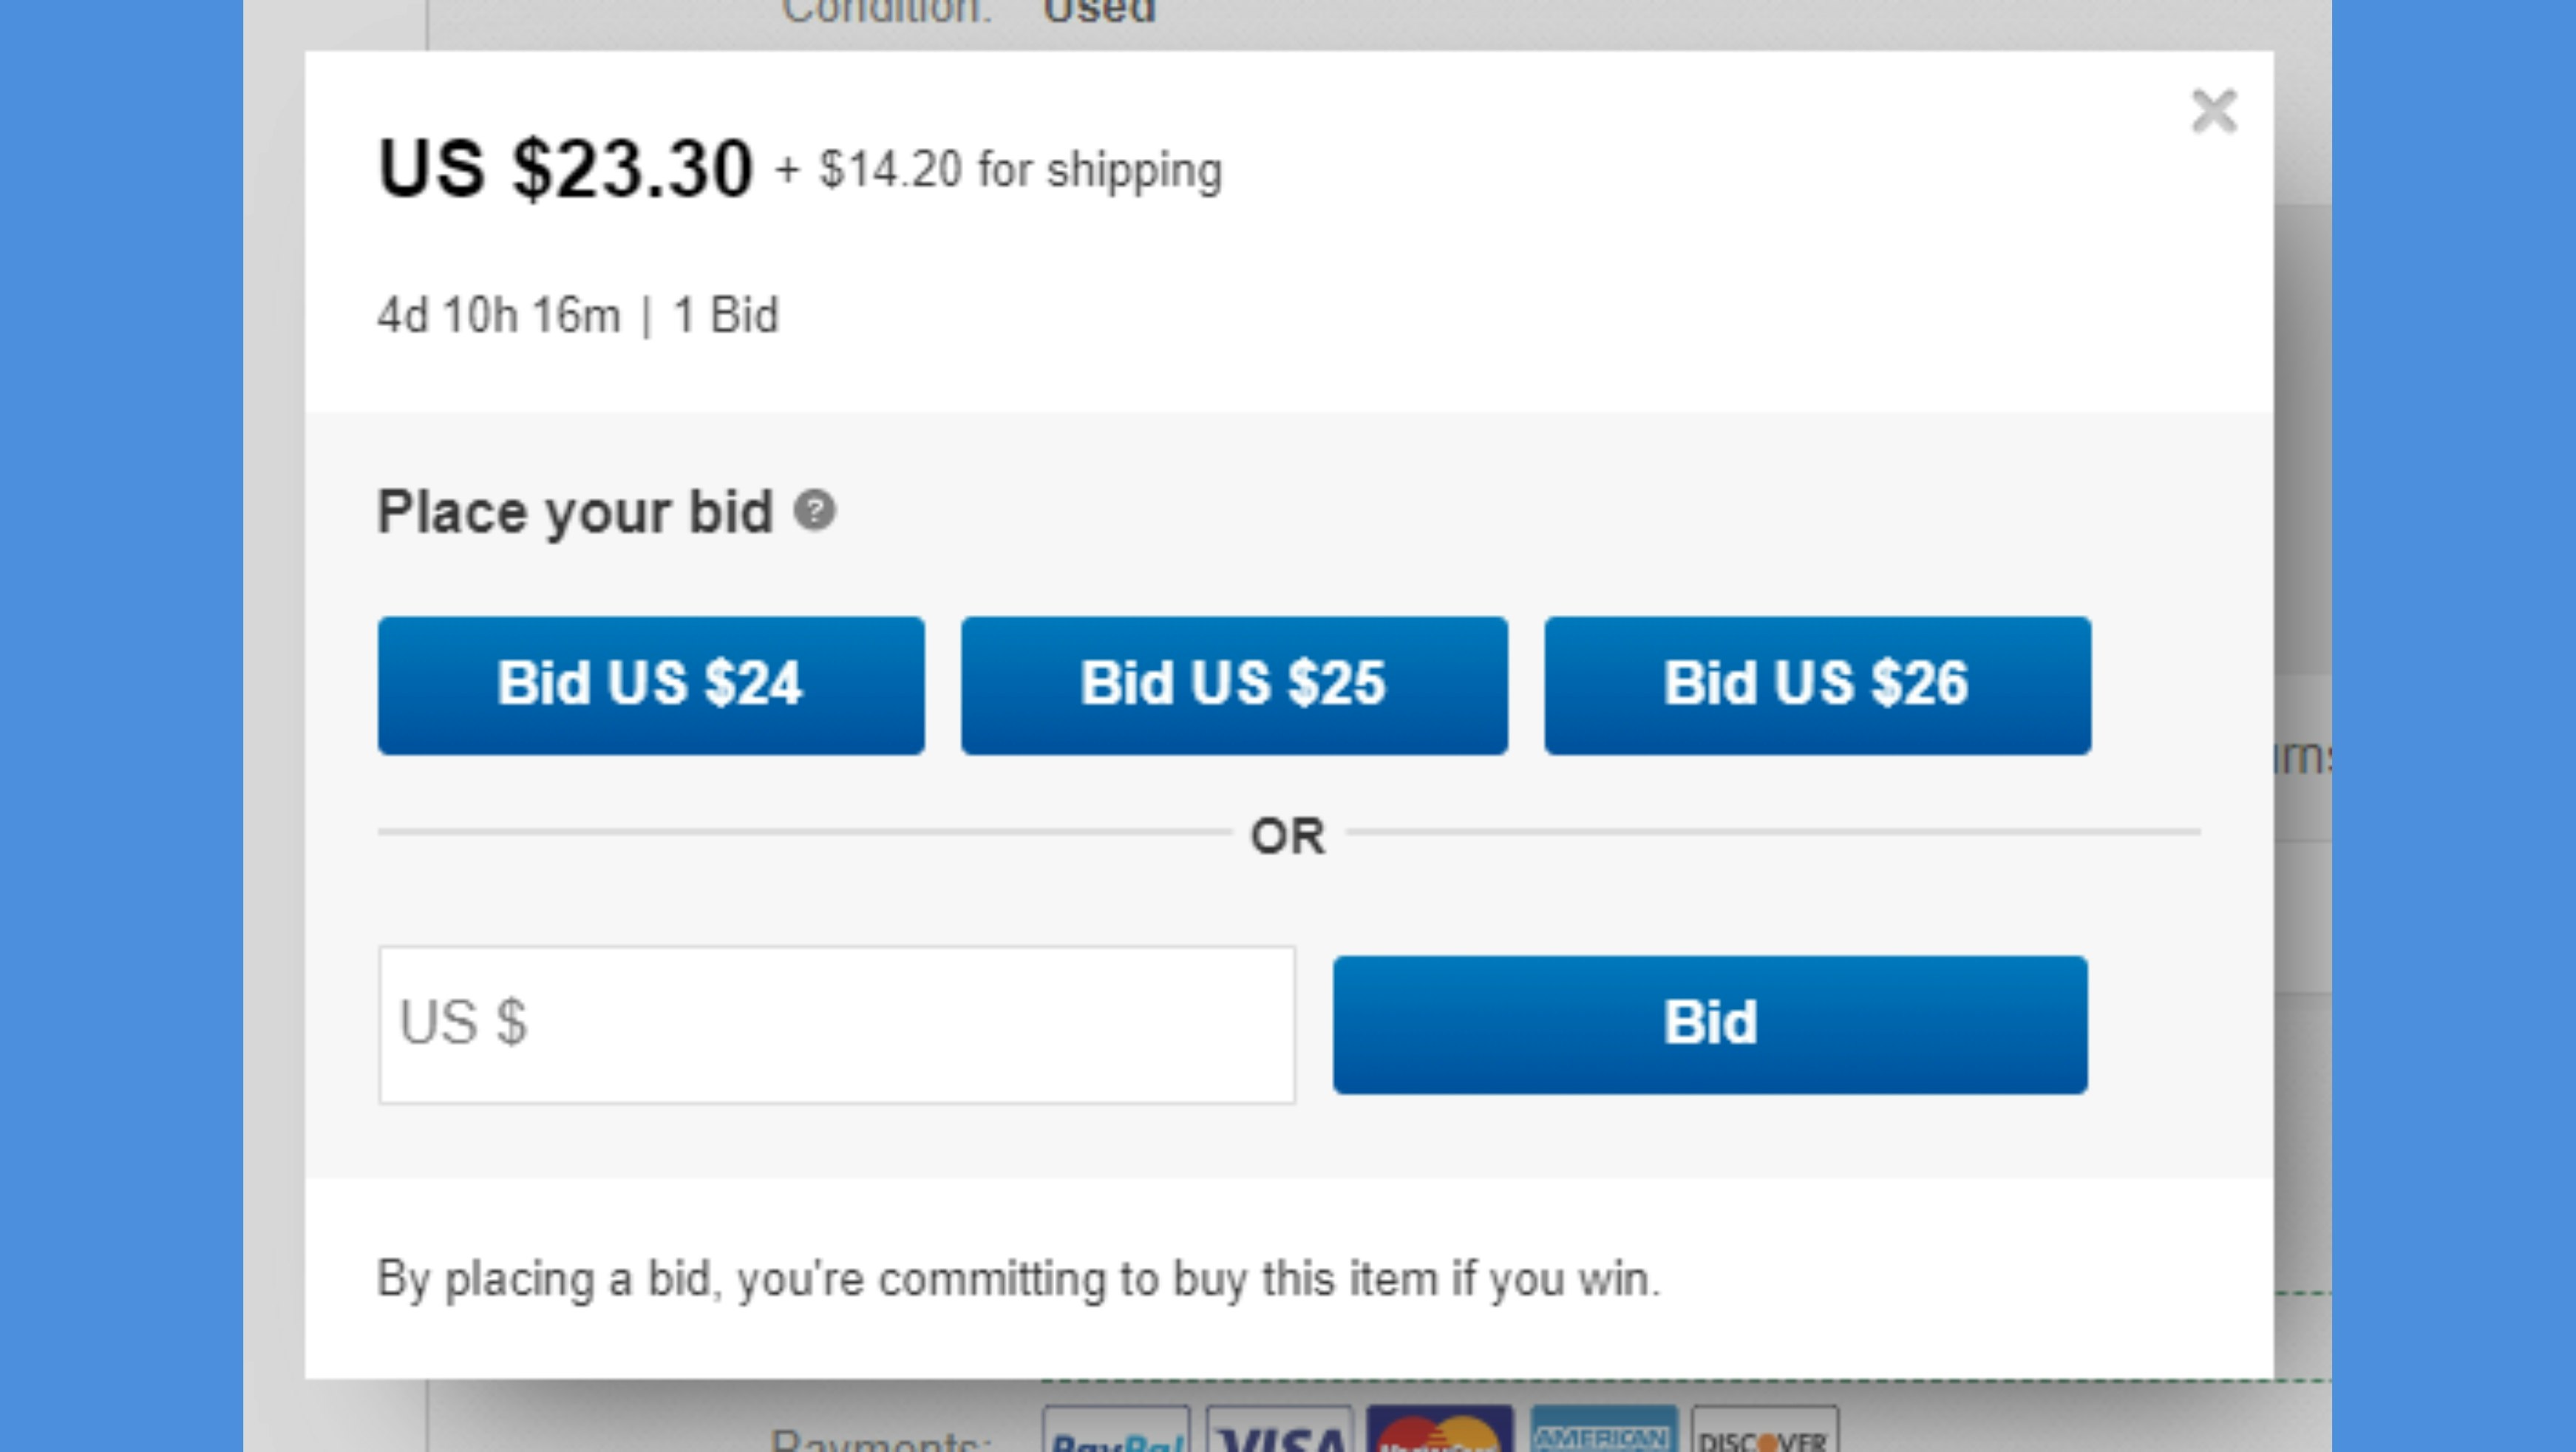 eBay automatic bidding feature dialogue box with three bidding amounts as buttons. The user interface of eBay is visible in the background.